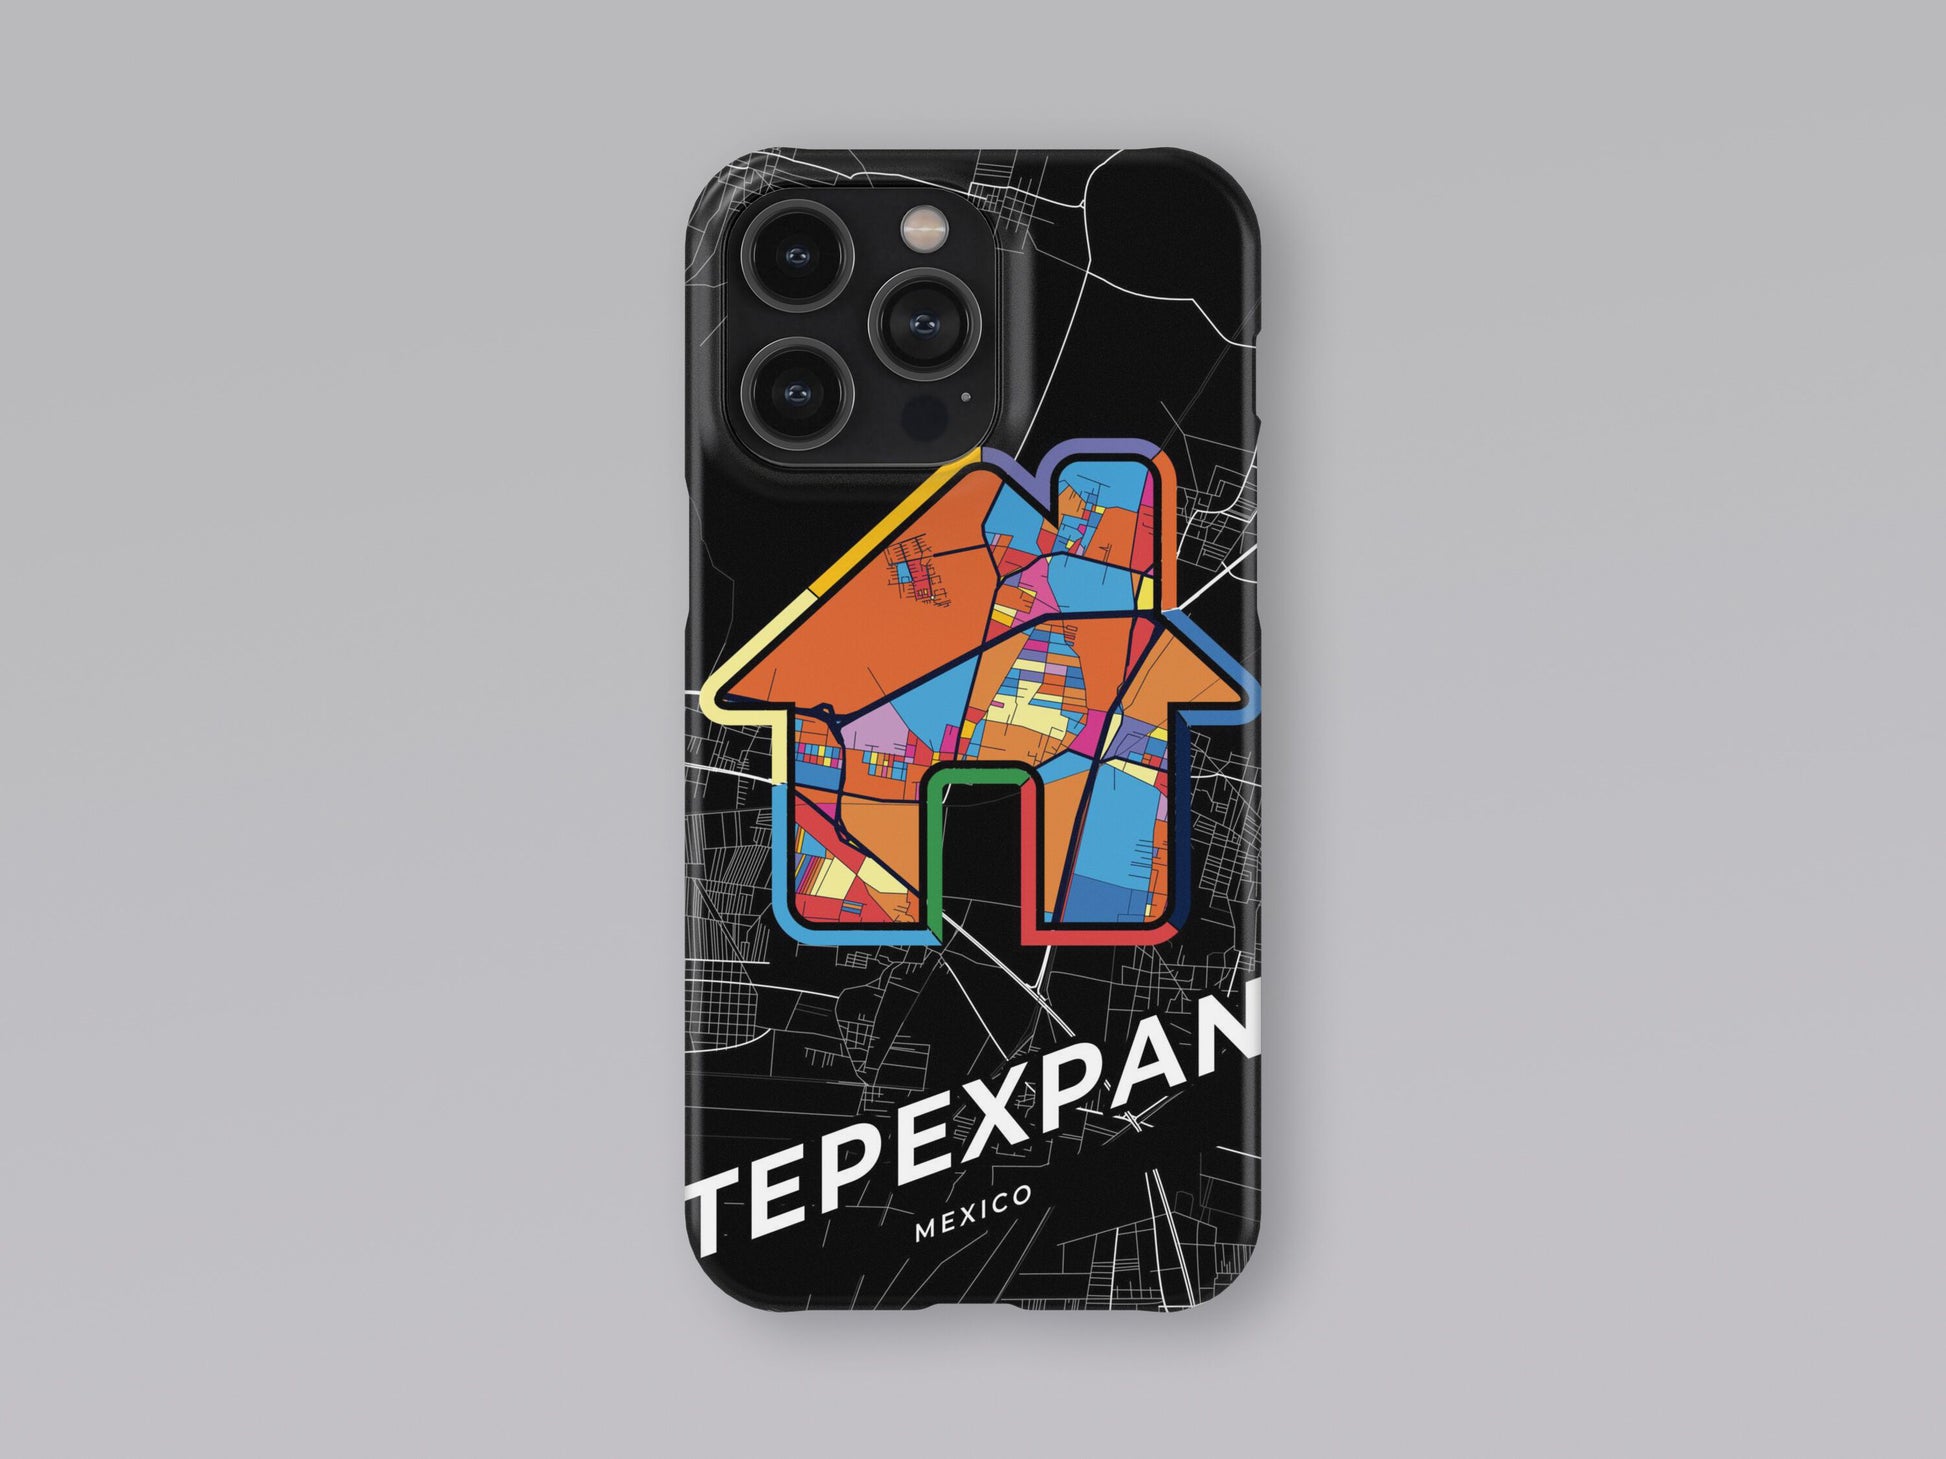 Tepexpan Mexico slim phone case with colorful icon 3